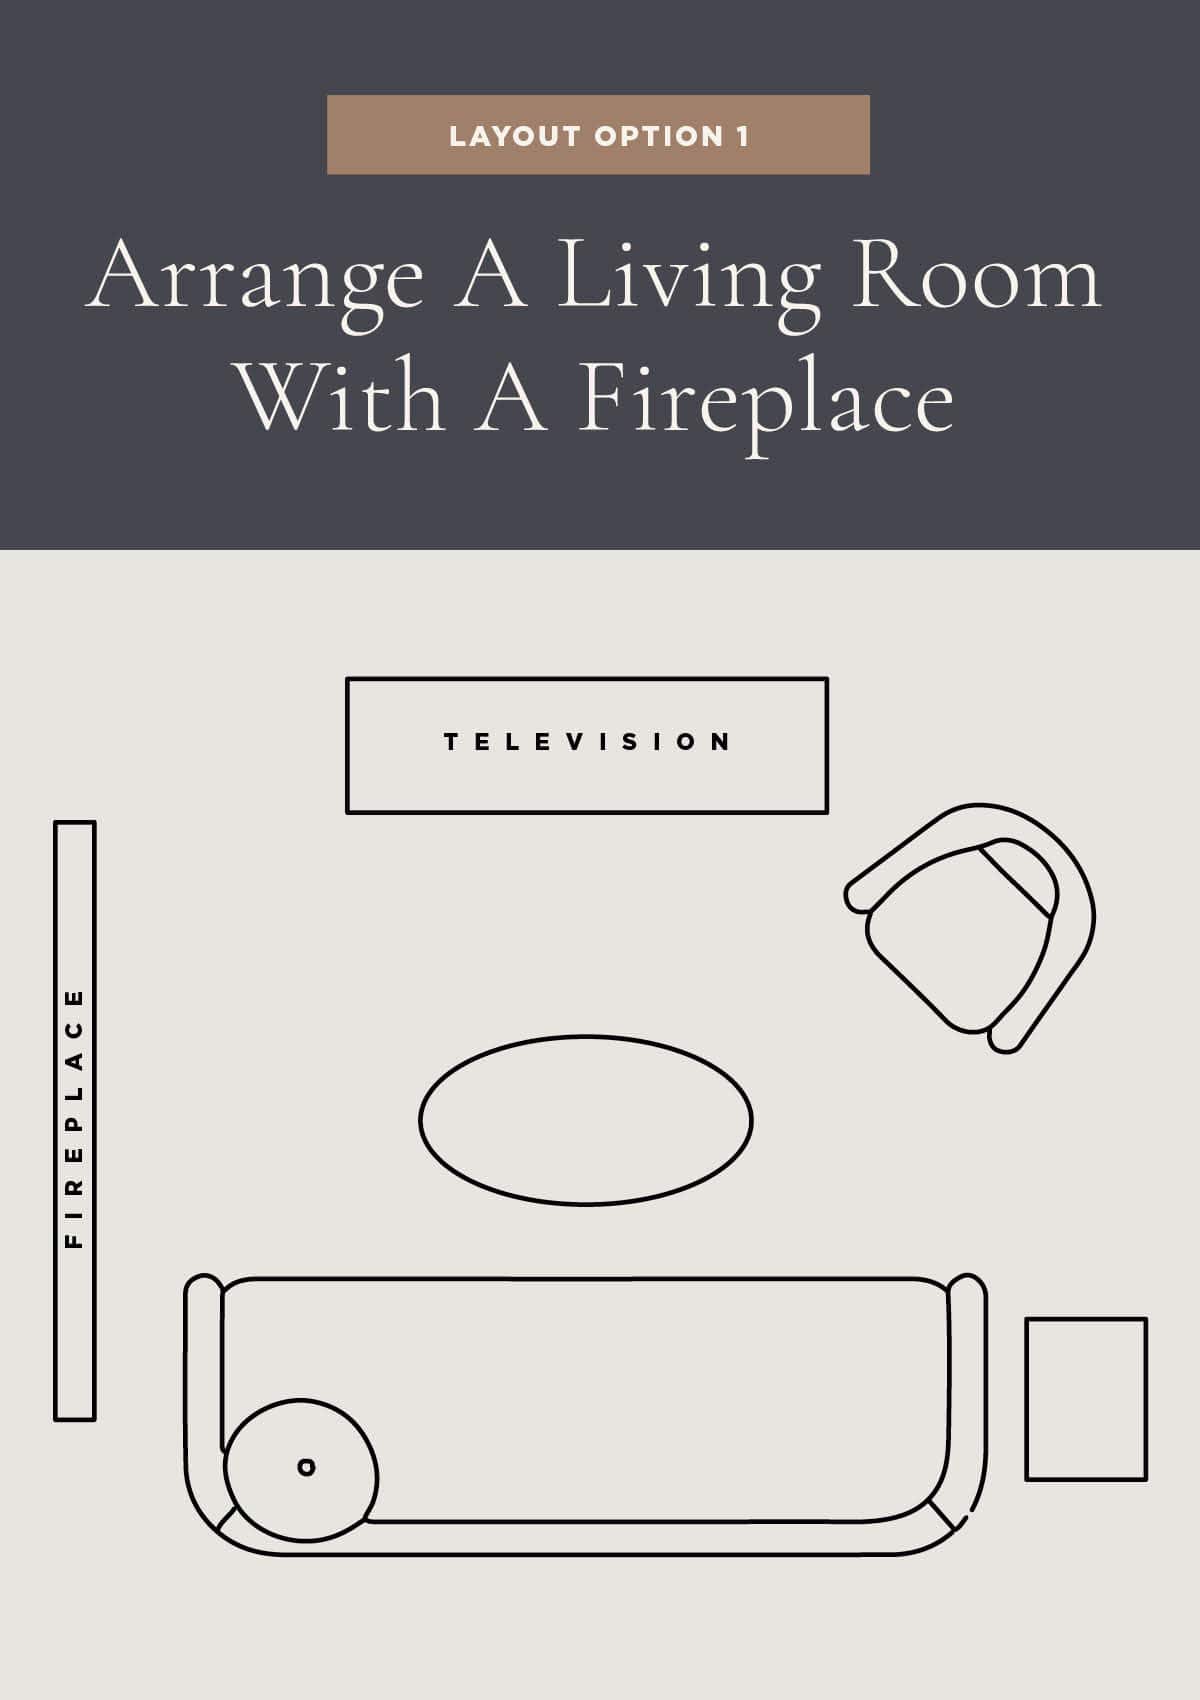 5 Living Room Layout Options with a Fireplace and TV On Opposite Wall - This living room layout has the couch placed in front of the TV but the fireplace still welcomes you as you enter the space.